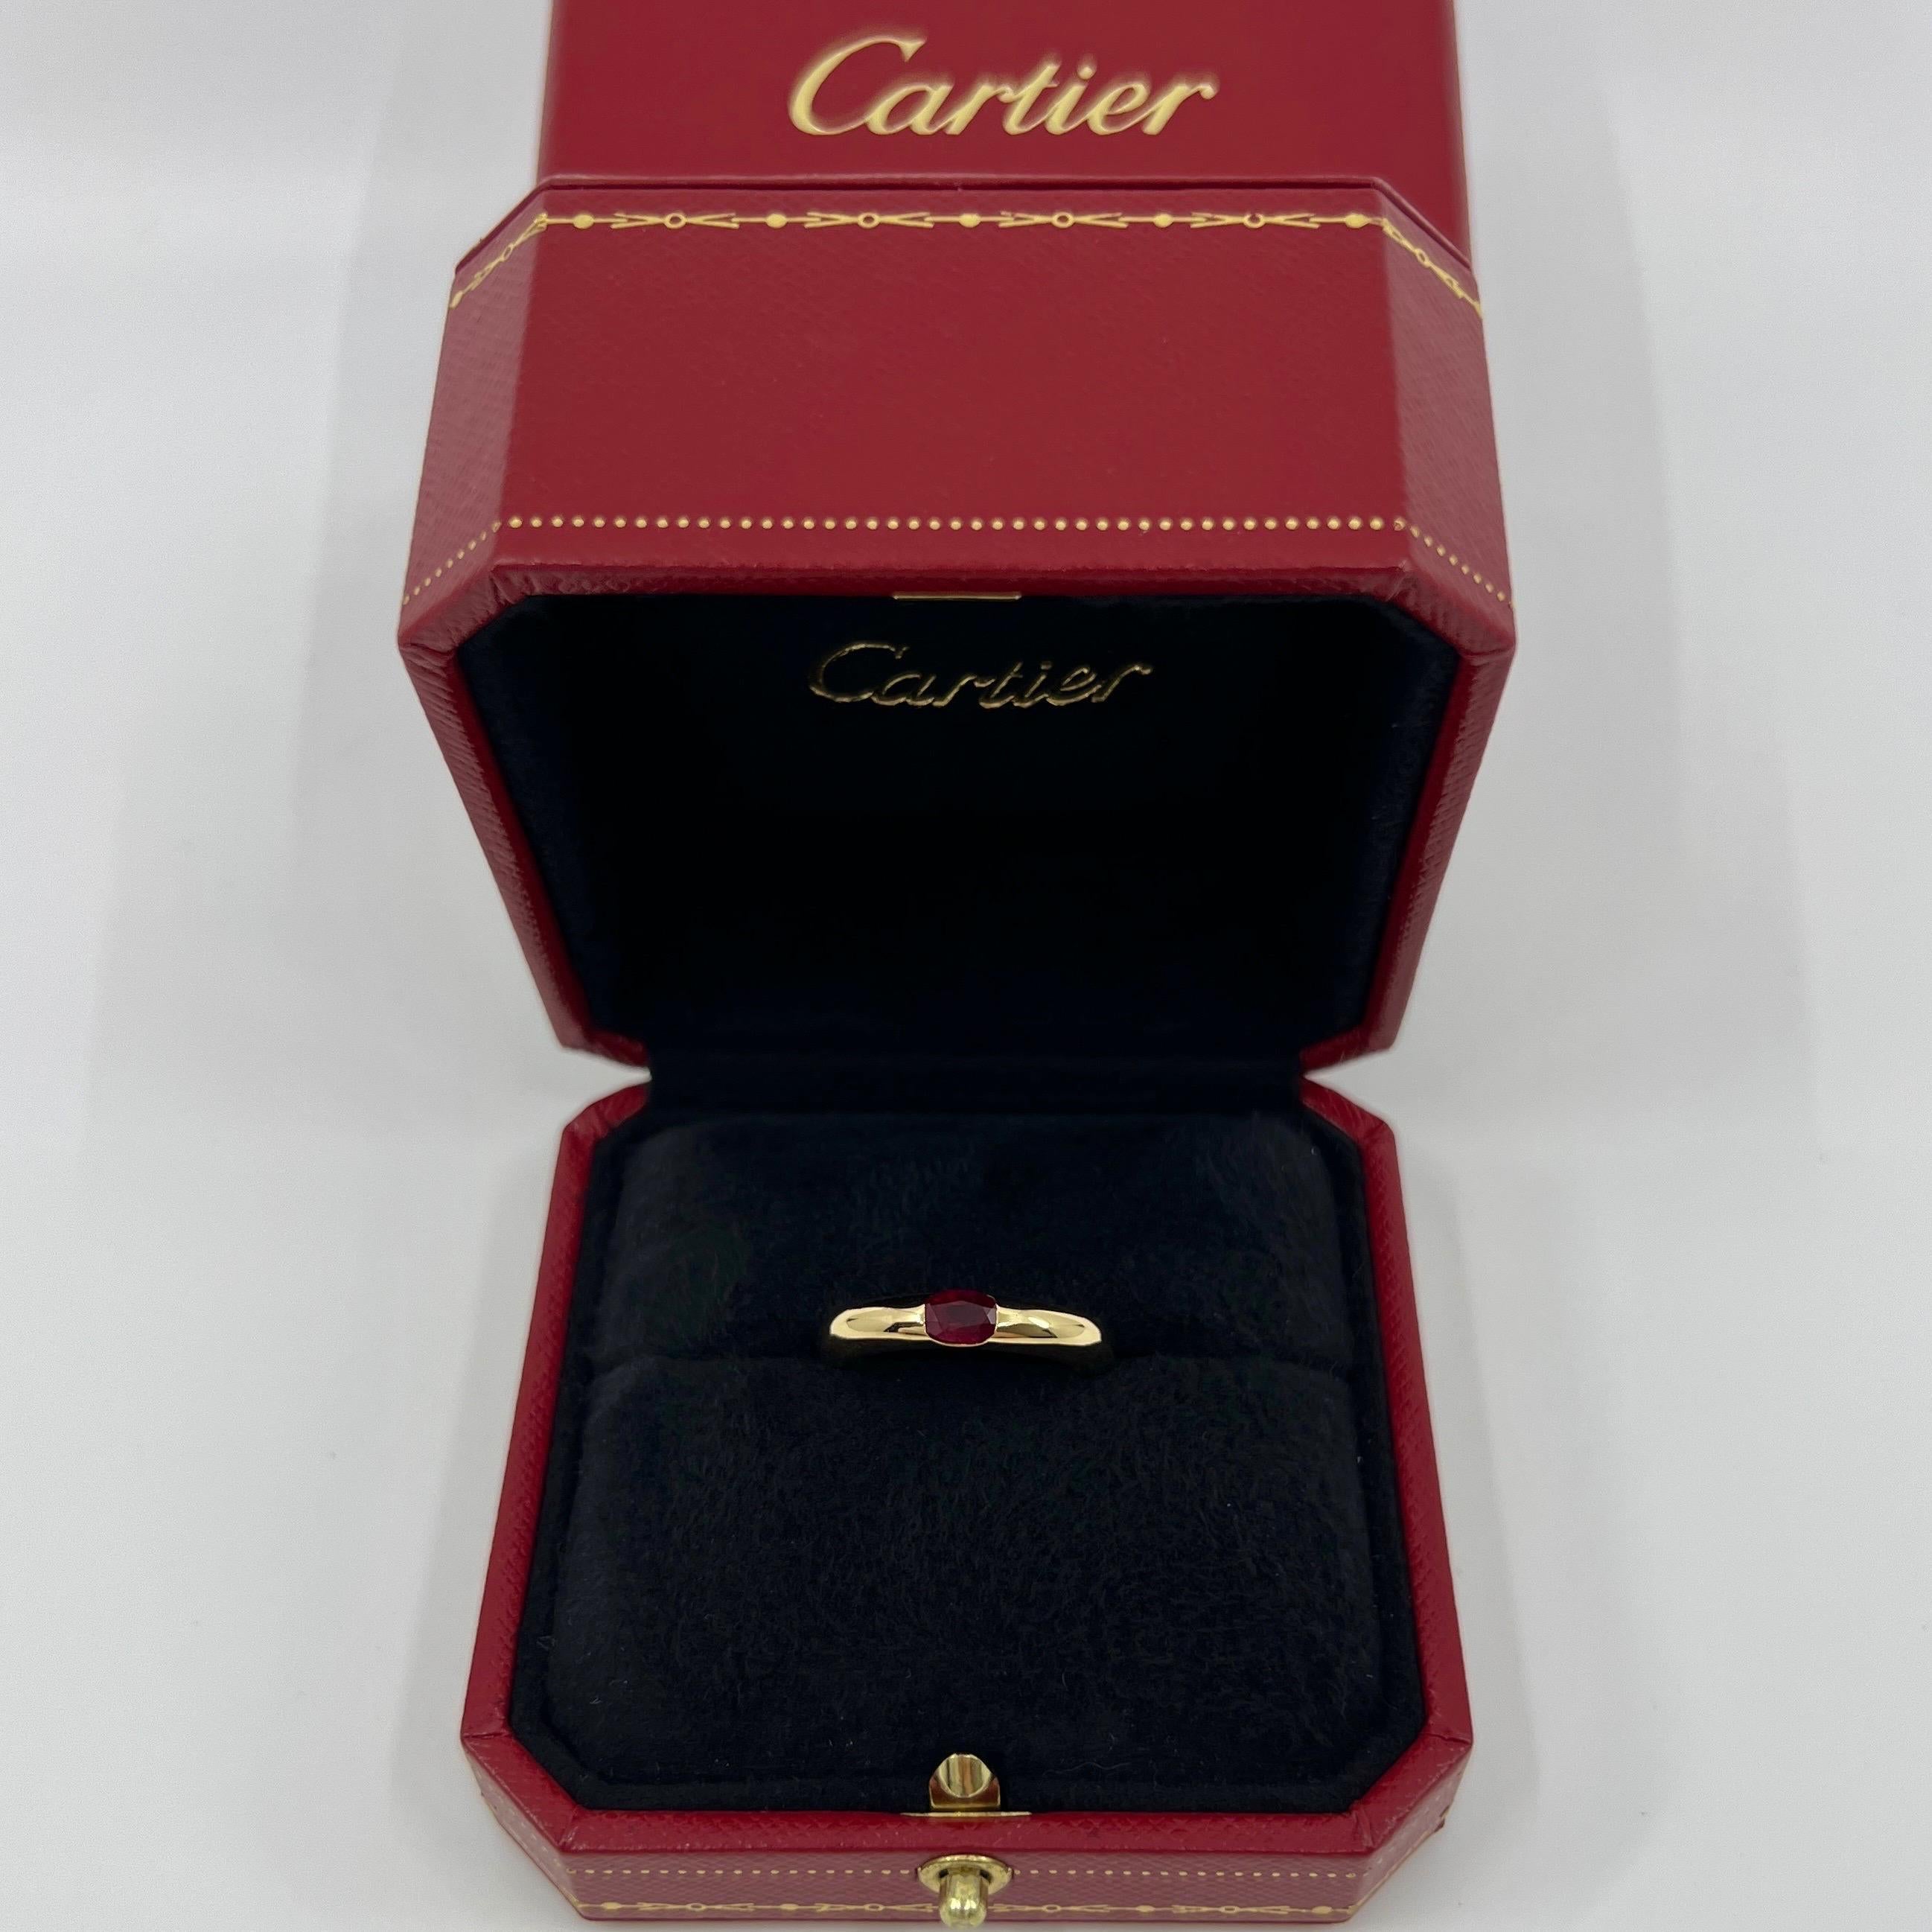 Vintage Cartier Deep Red Oval Cut Ruby 18k Yellow Gold Solitaire Band Ring.

Stunning yellow gold ring set with a fine deep red ruby. Fine jewellery houses like Cartier only use the finest of gemstones and this ruby is no exception. An excellent